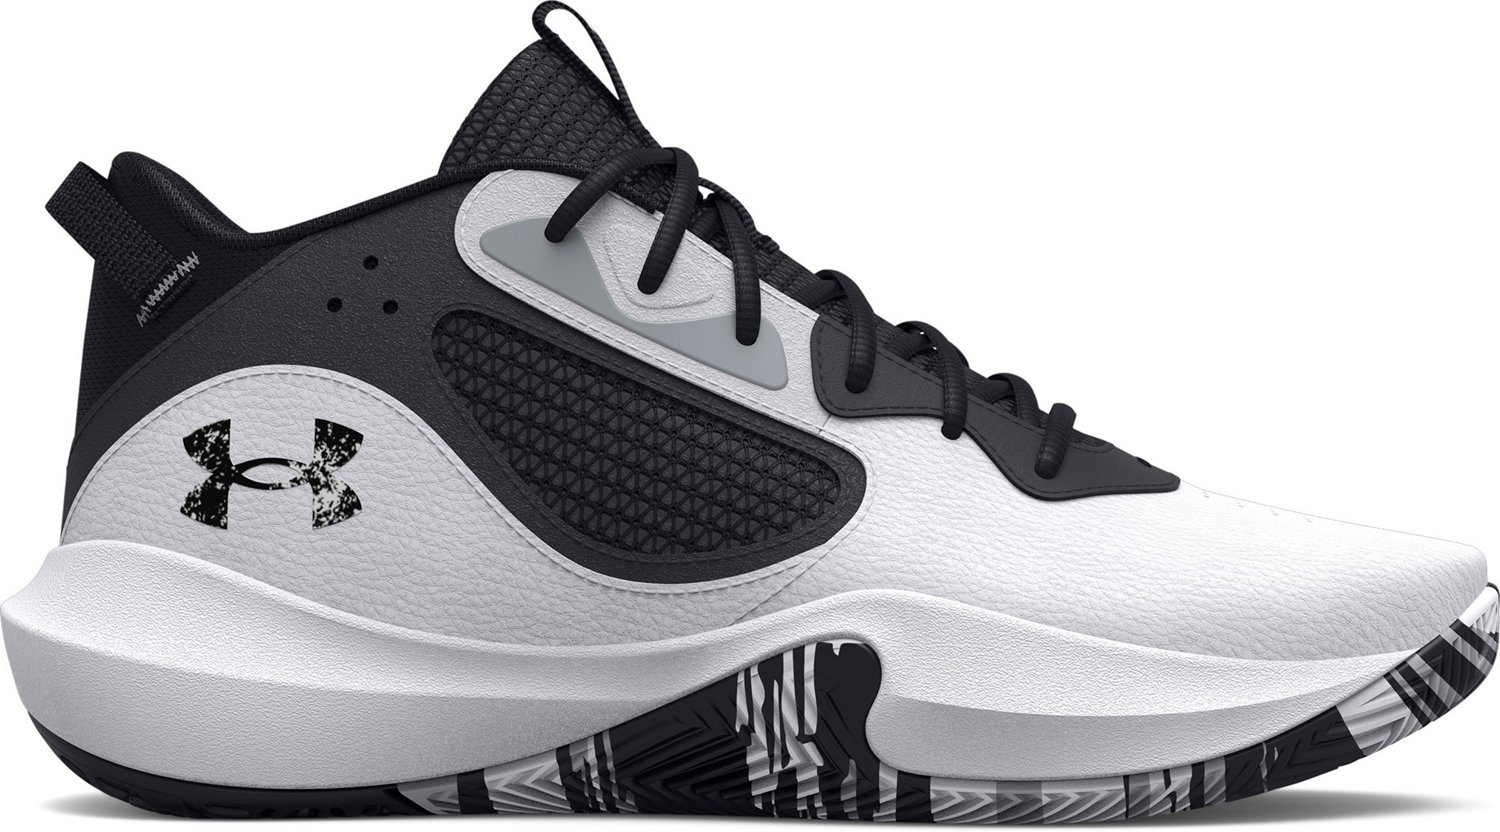 Under Armour Lockdown 6 Unisex Basketball Shoes